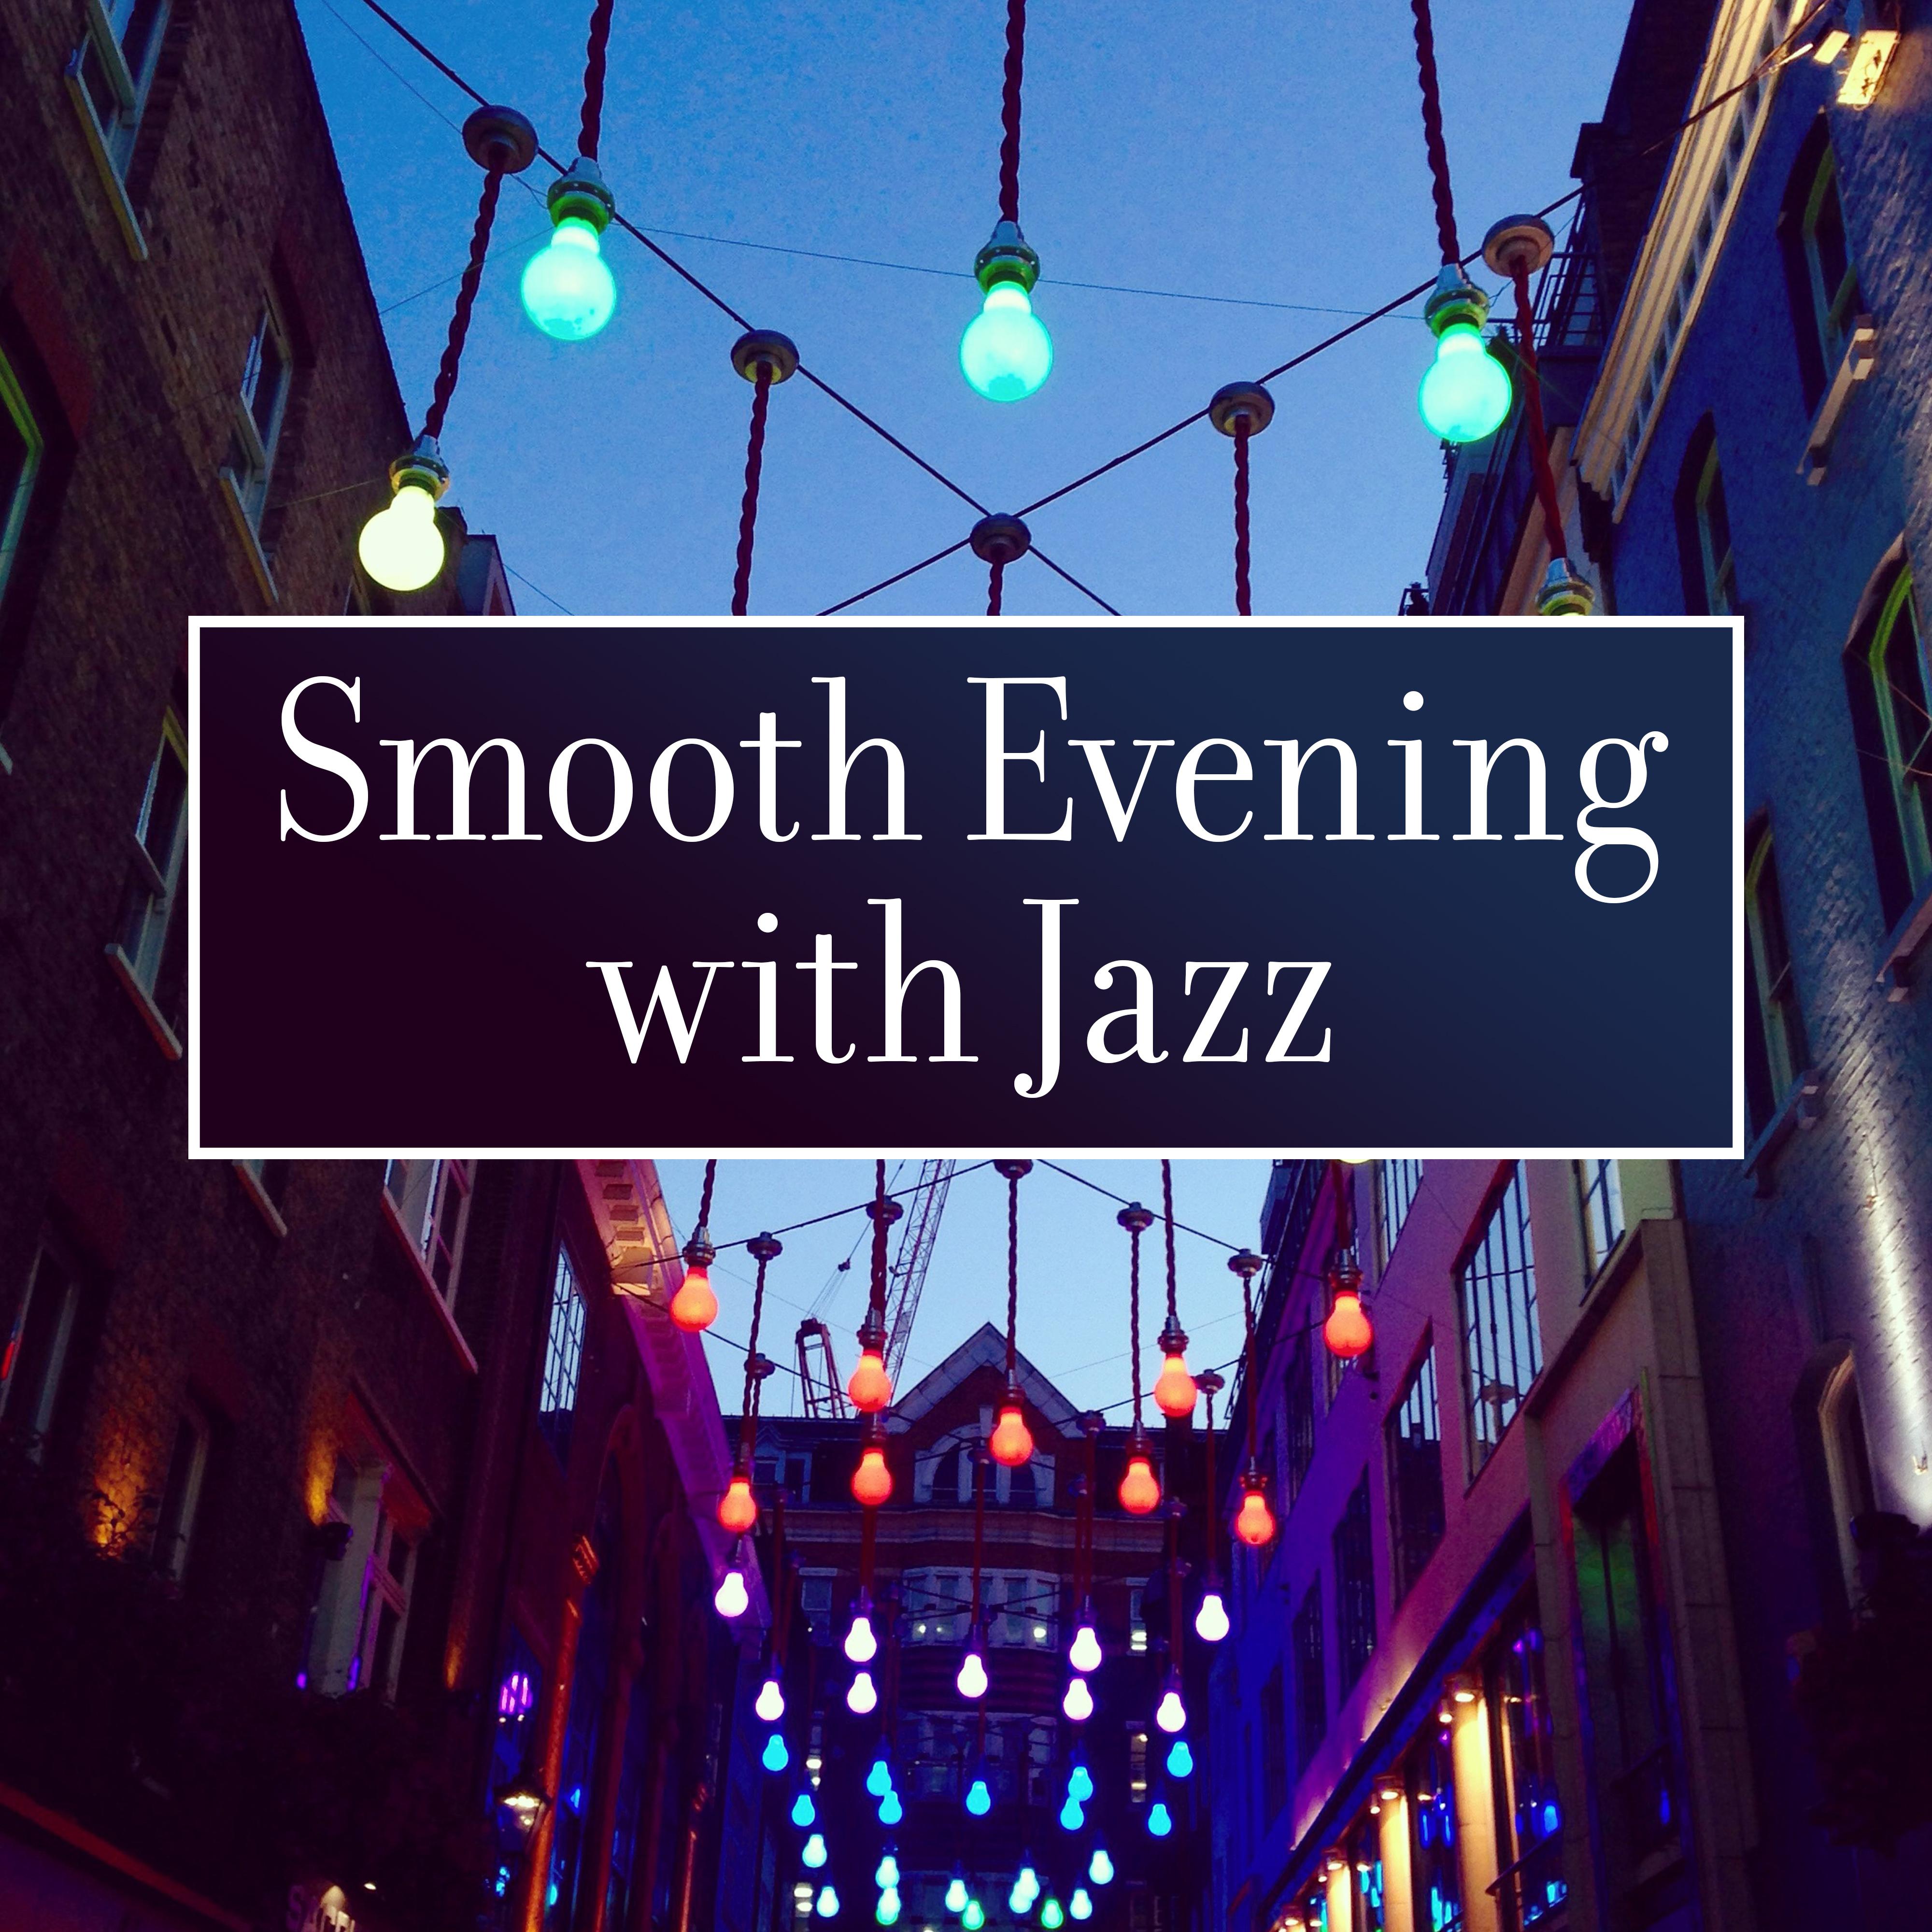 Smooth Evening with Jazz